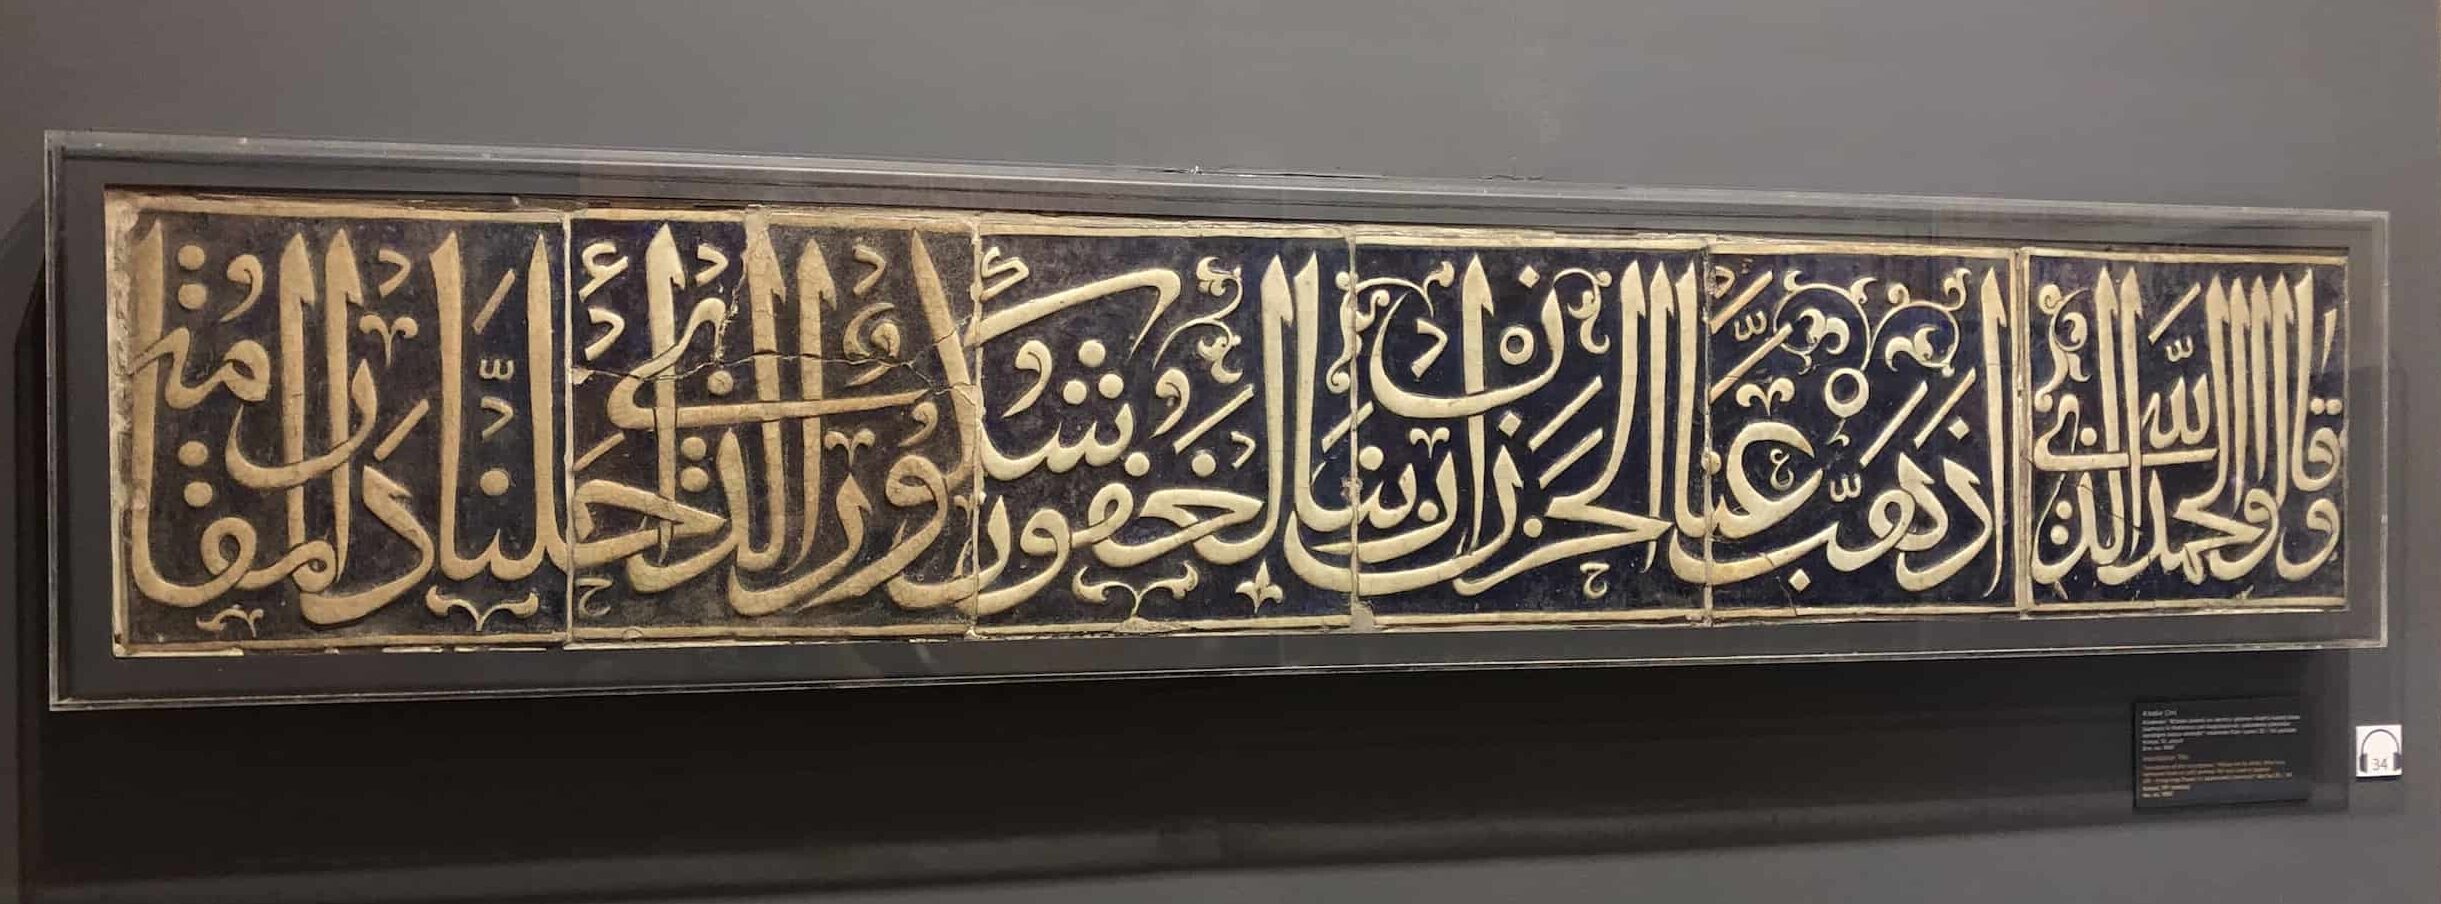 13th century inscription tile in Anatolian Seljuk Period at the Museum of Turkish and Islamic Arts in Istanbul, Turkey